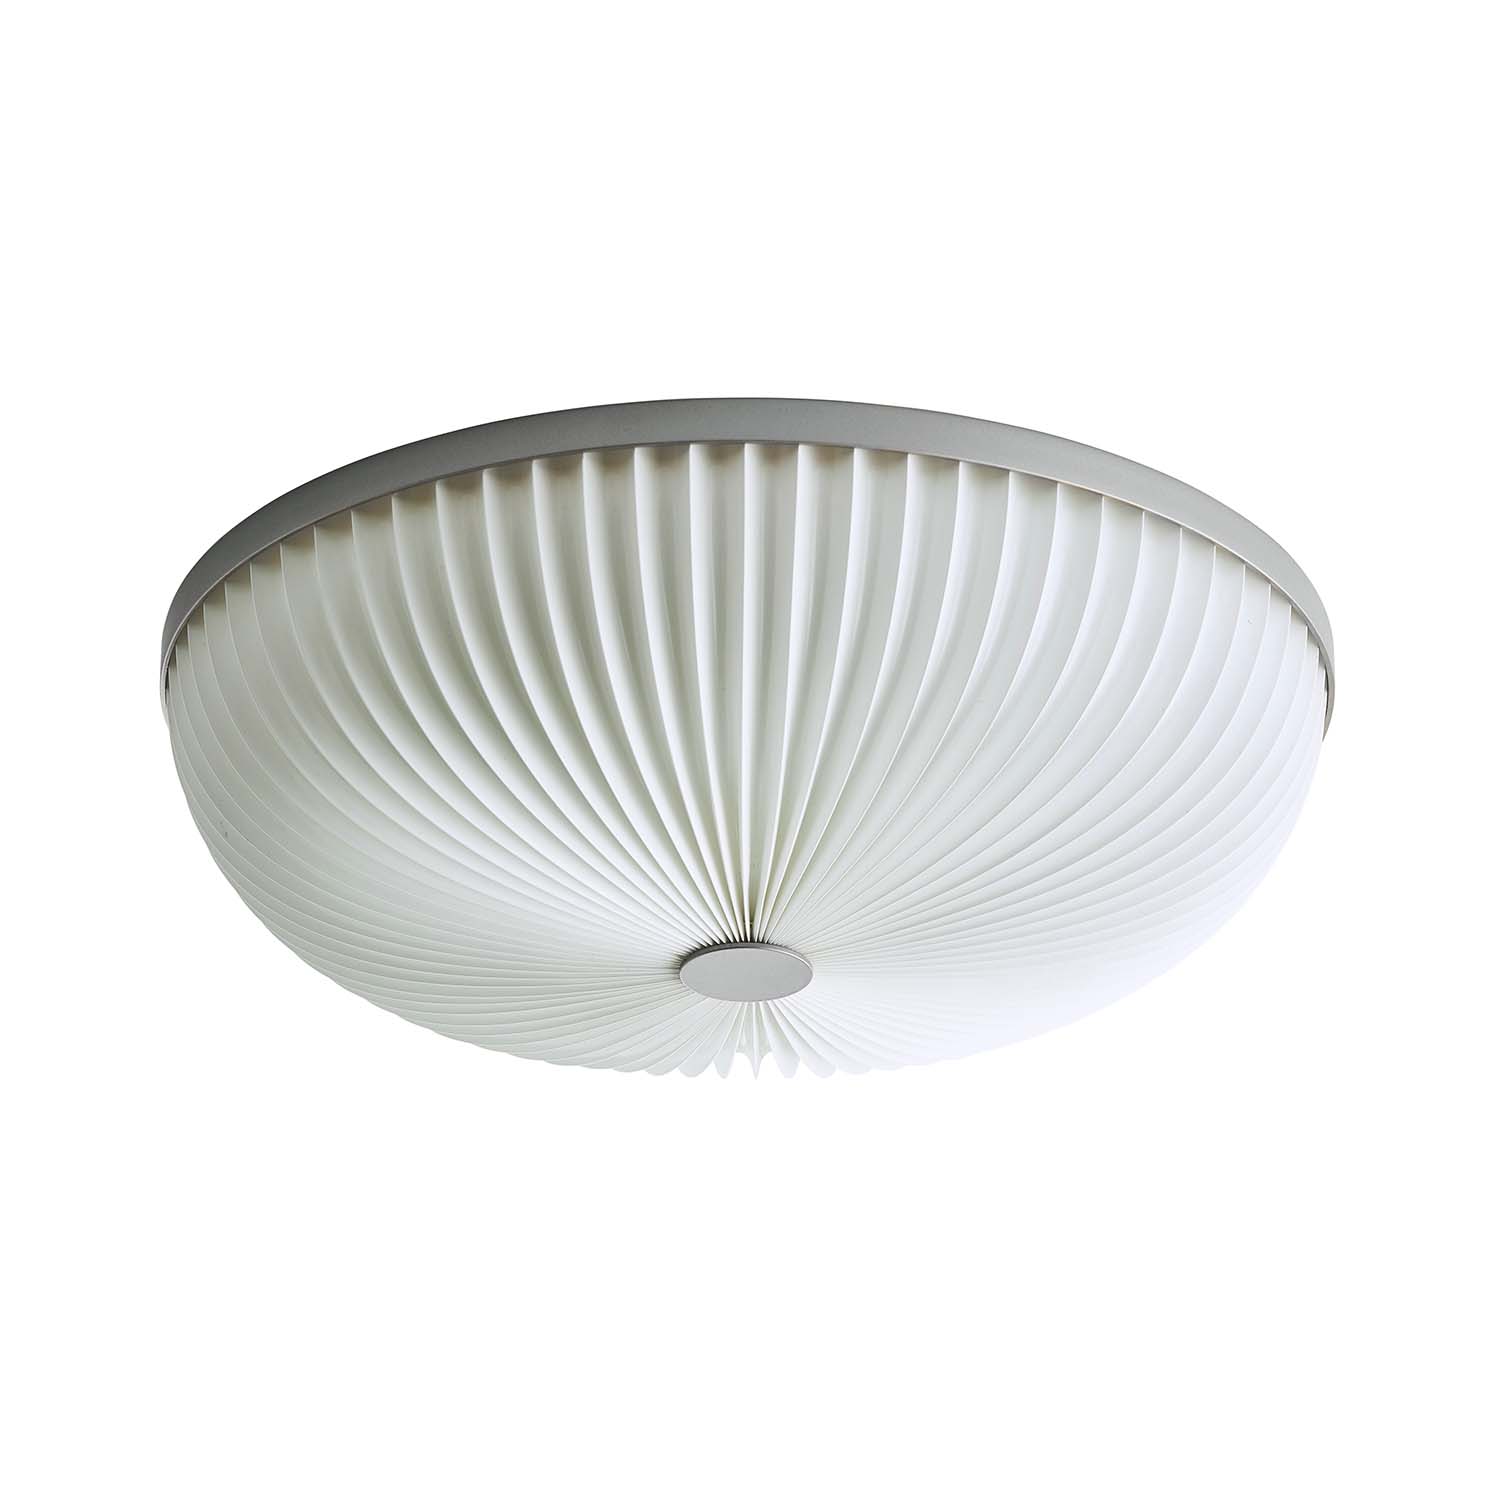 LAMELLA - Handcrafted white pleated paper ceiling light